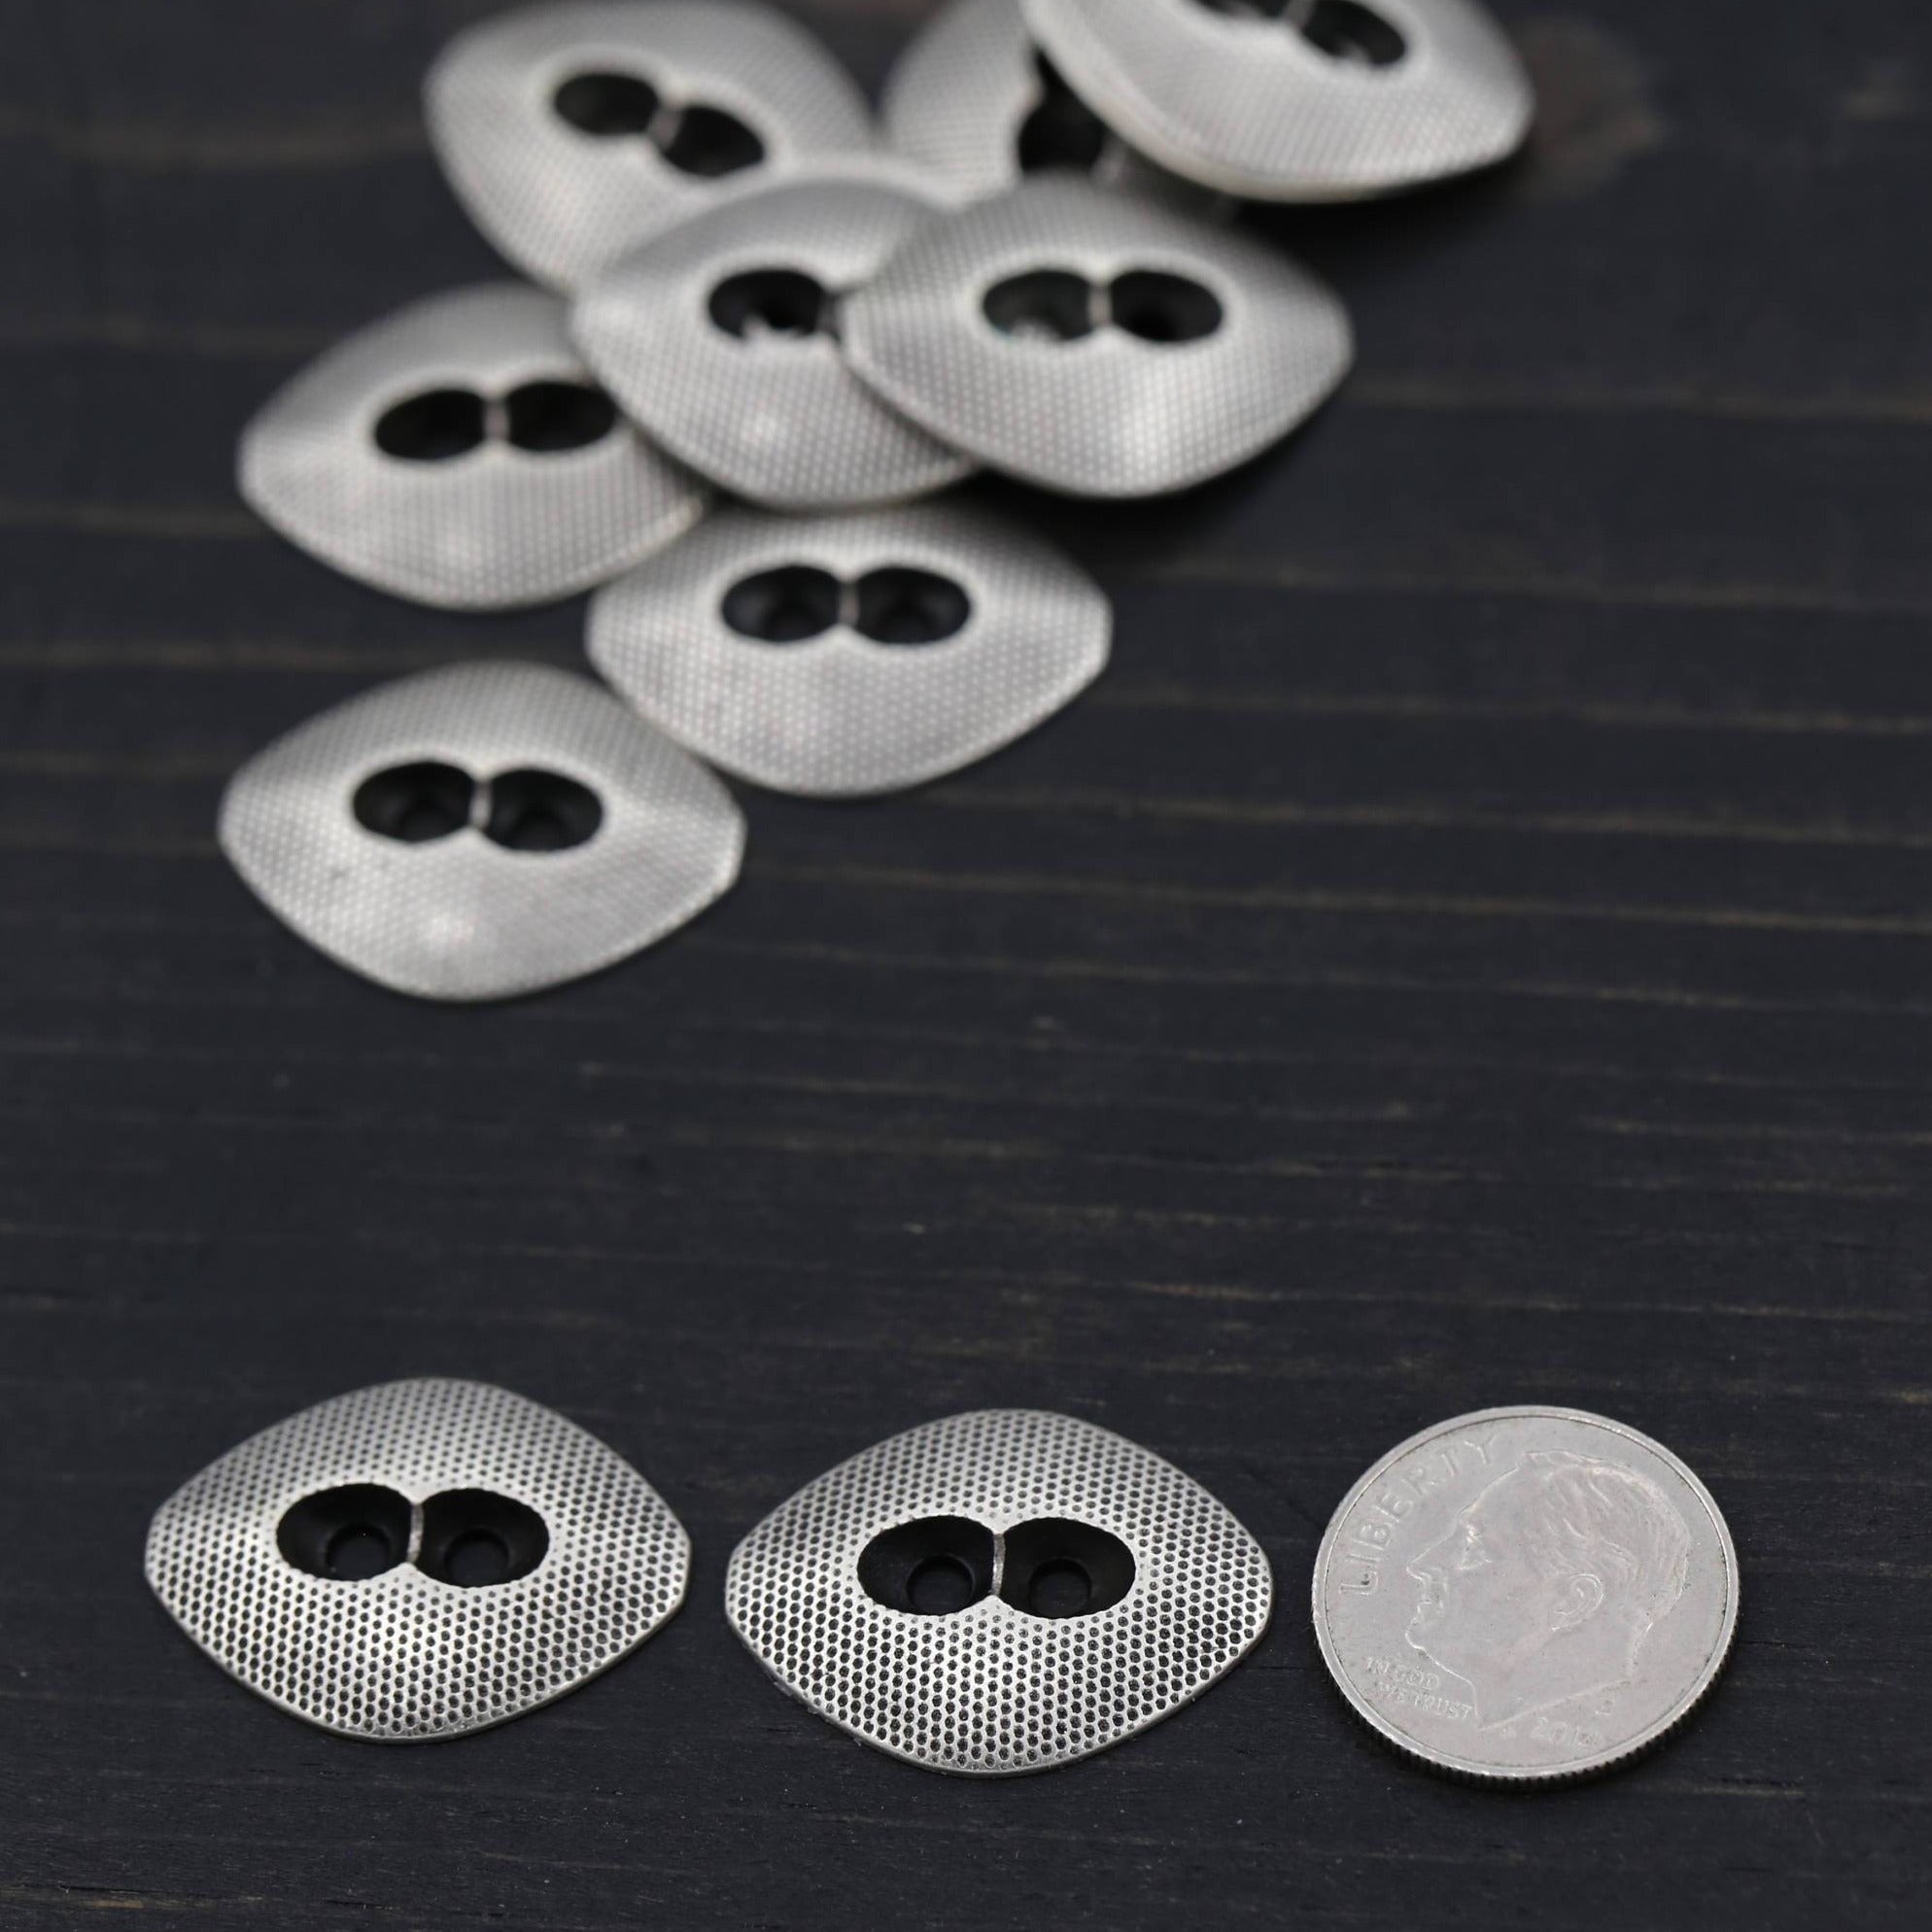 4 Silver Rhombus Shaped Scaled Modern Design Metal Button